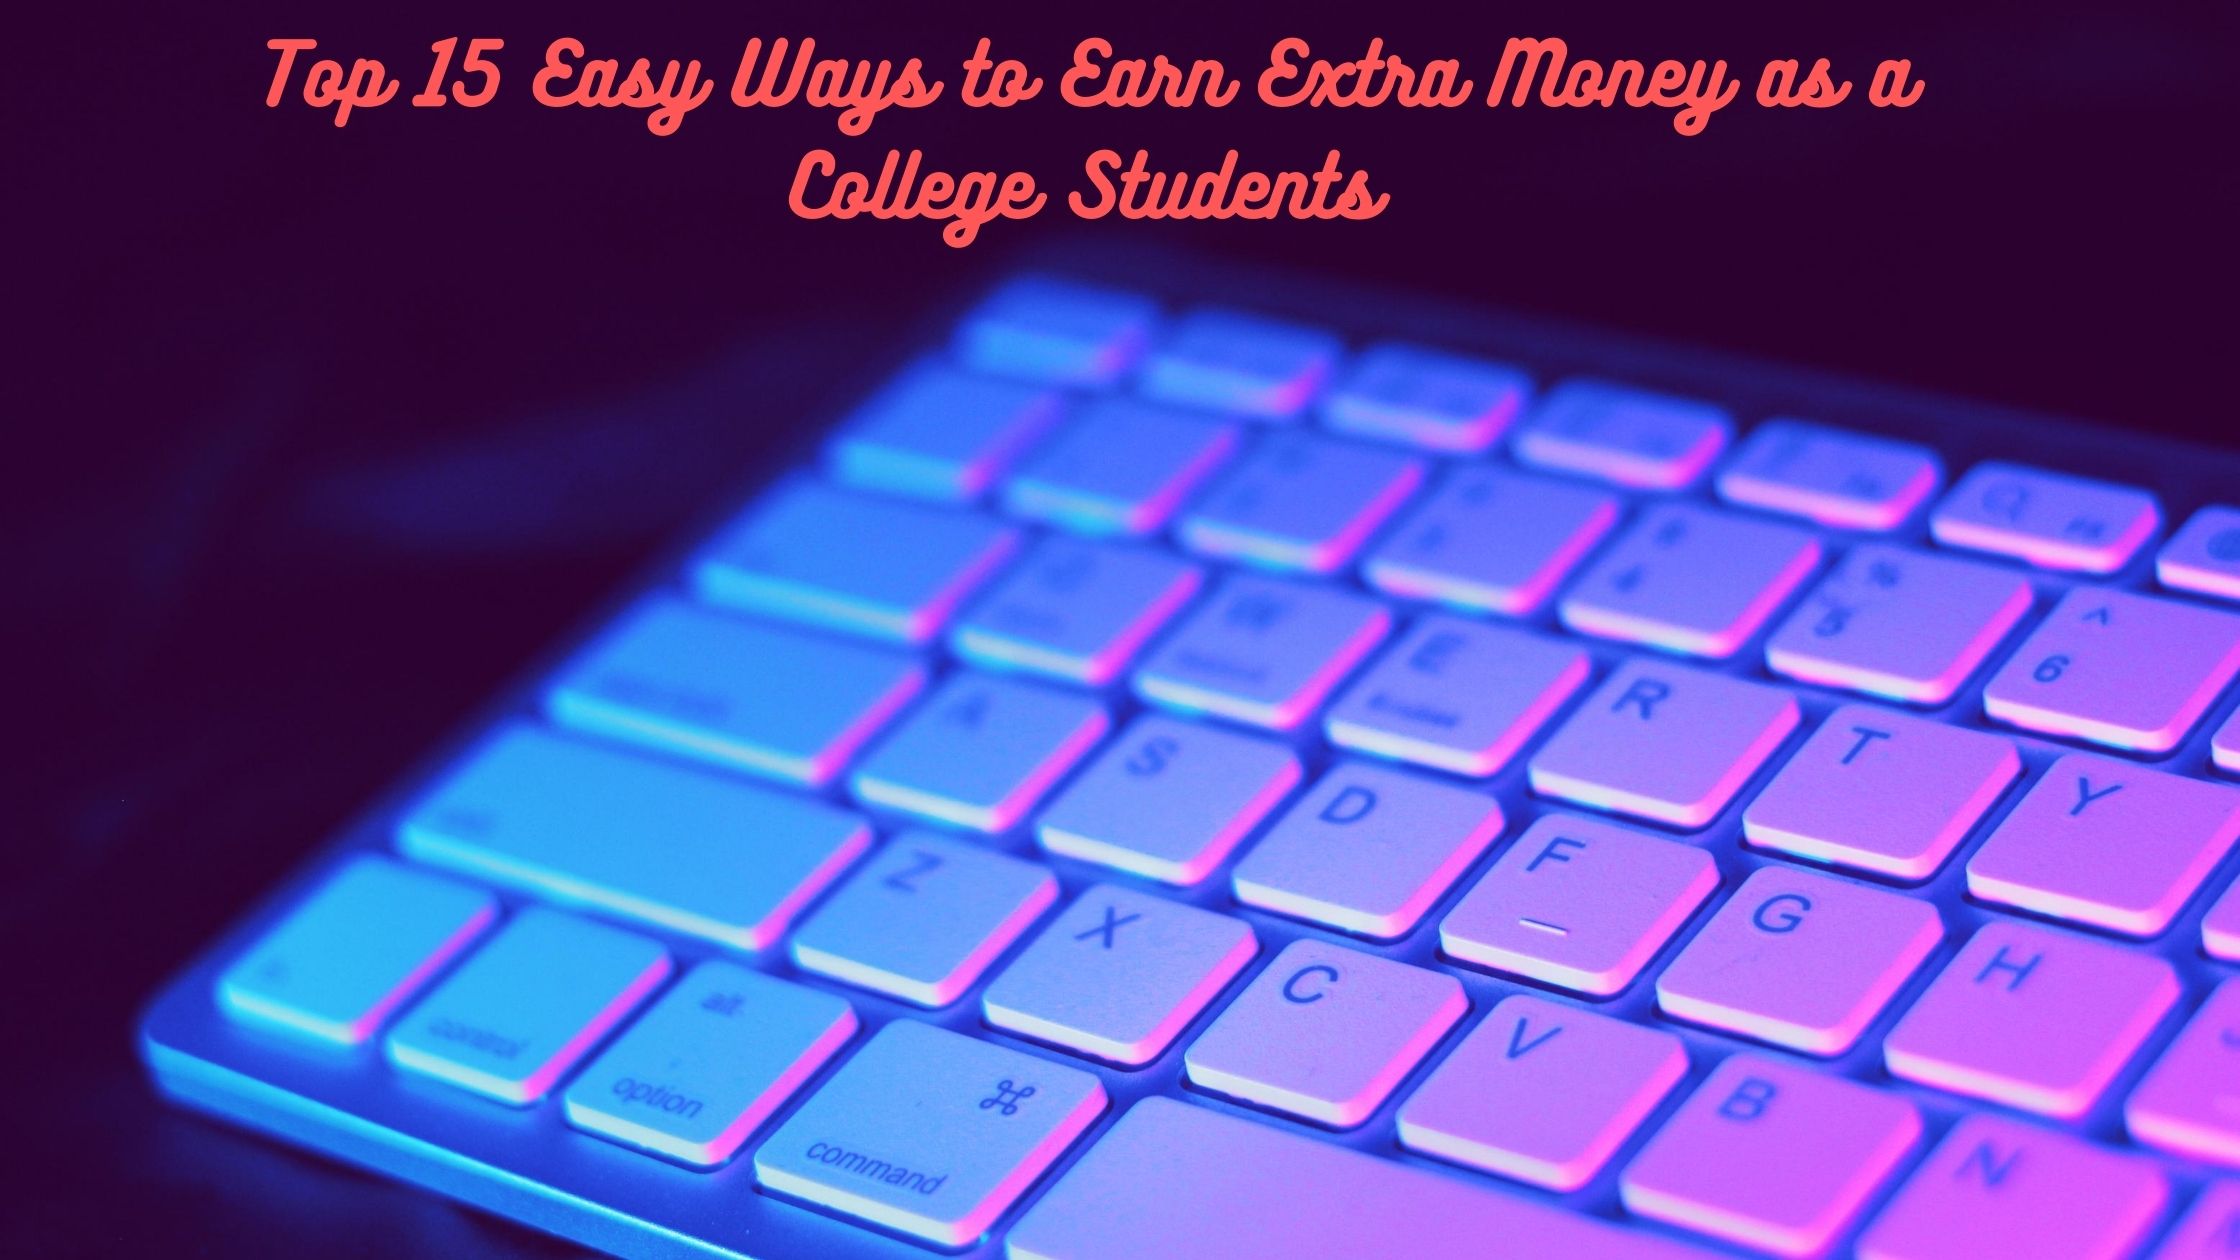 Top 15 Easy Ways to Earn Extra Money as a College Students